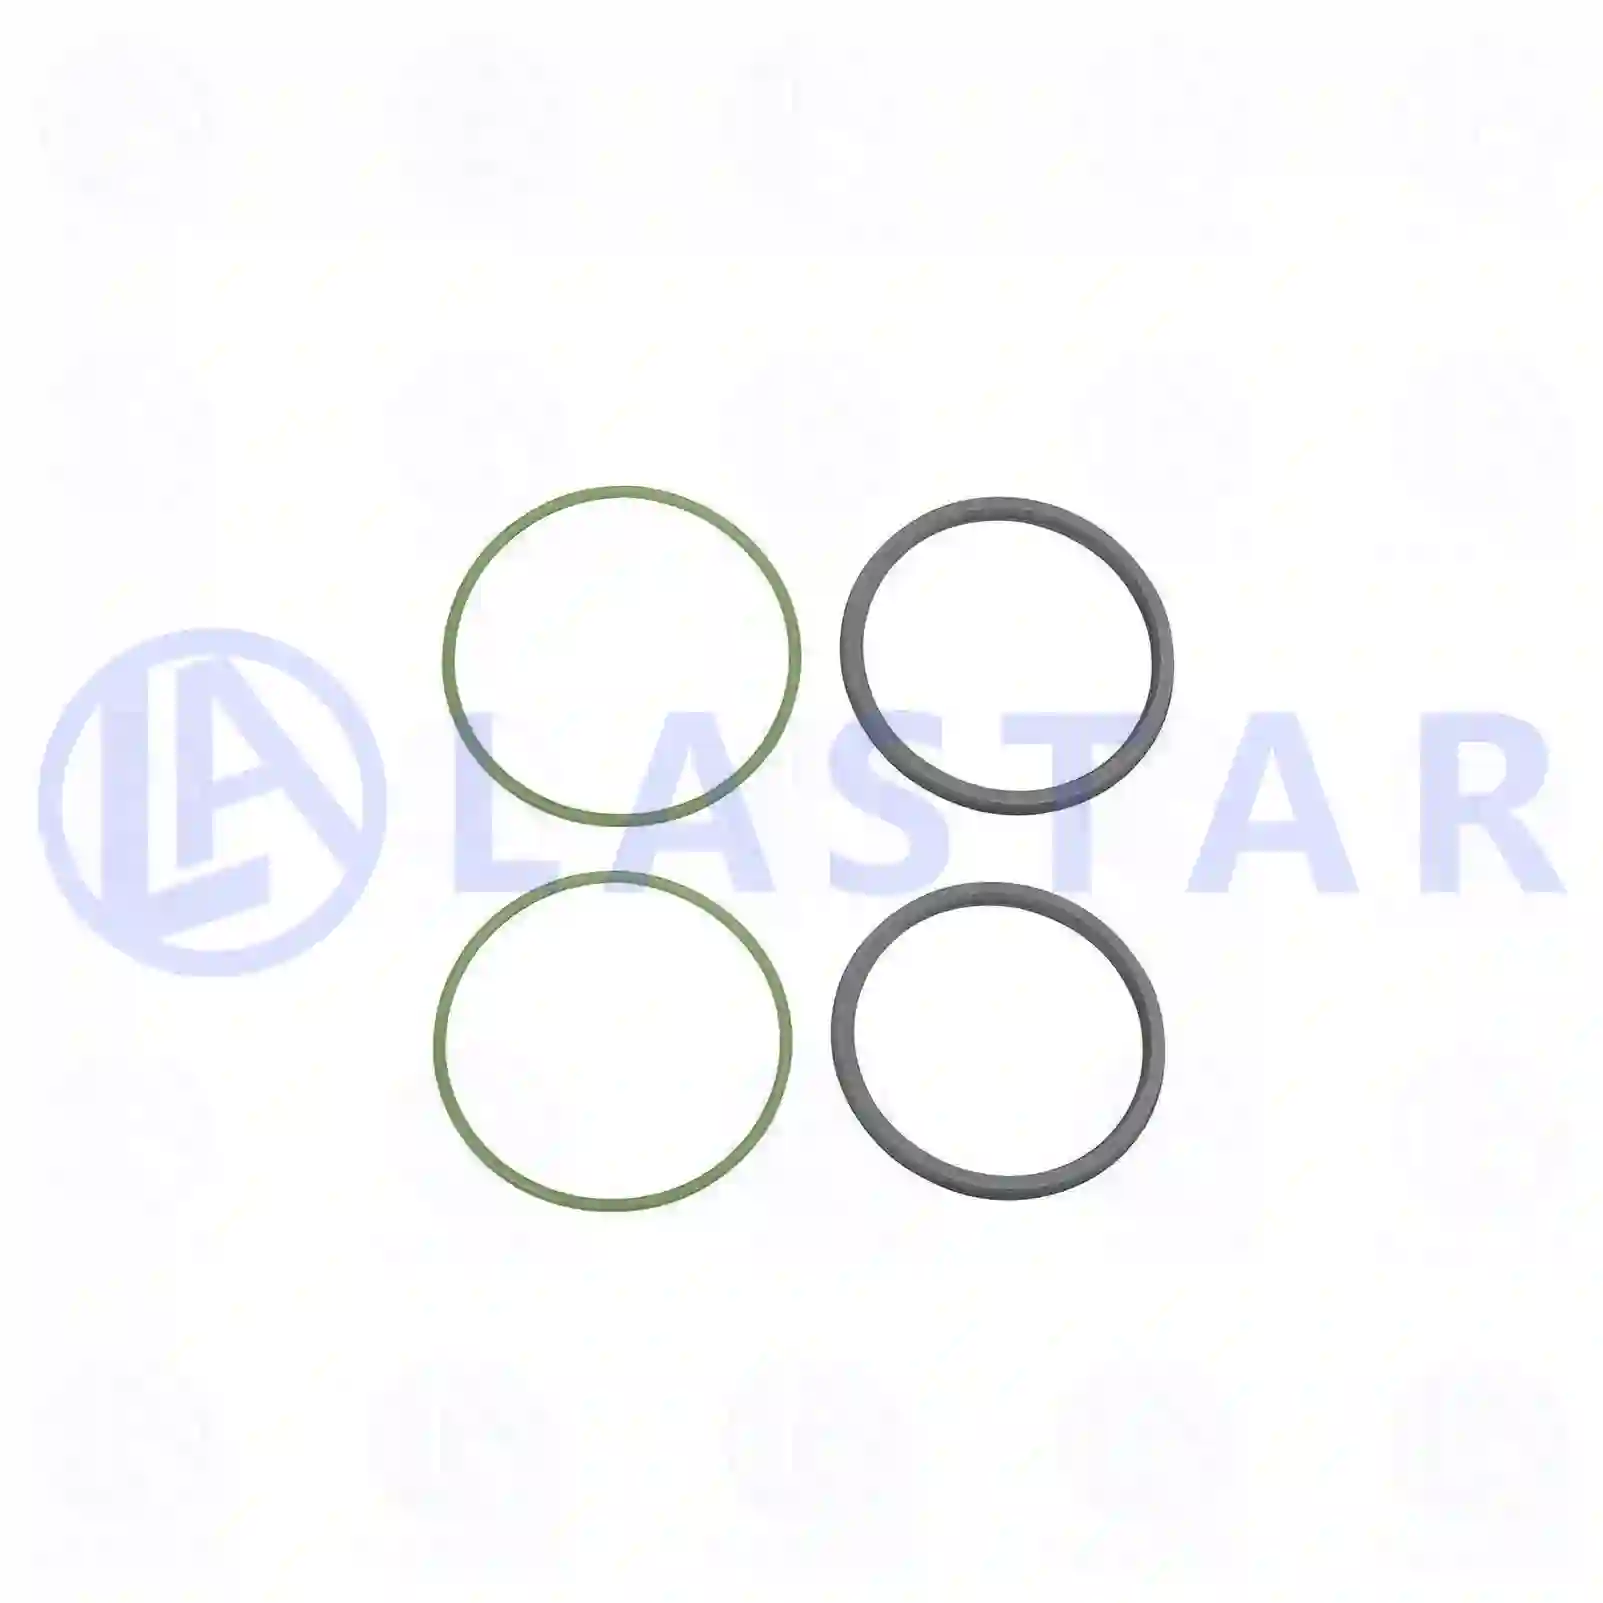 Seal ring kit, accumulator, 77733615, 1747588, 1885913, 1921913, 2817940, ZG30590-0008 ||  77733615 Lastar Spare Part | Truck Spare Parts, Auotomotive Spare Parts Seal ring kit, accumulator, 77733615, 1747588, 1885913, 1921913, 2817940, ZG30590-0008 ||  77733615 Lastar Spare Part | Truck Spare Parts, Auotomotive Spare Parts